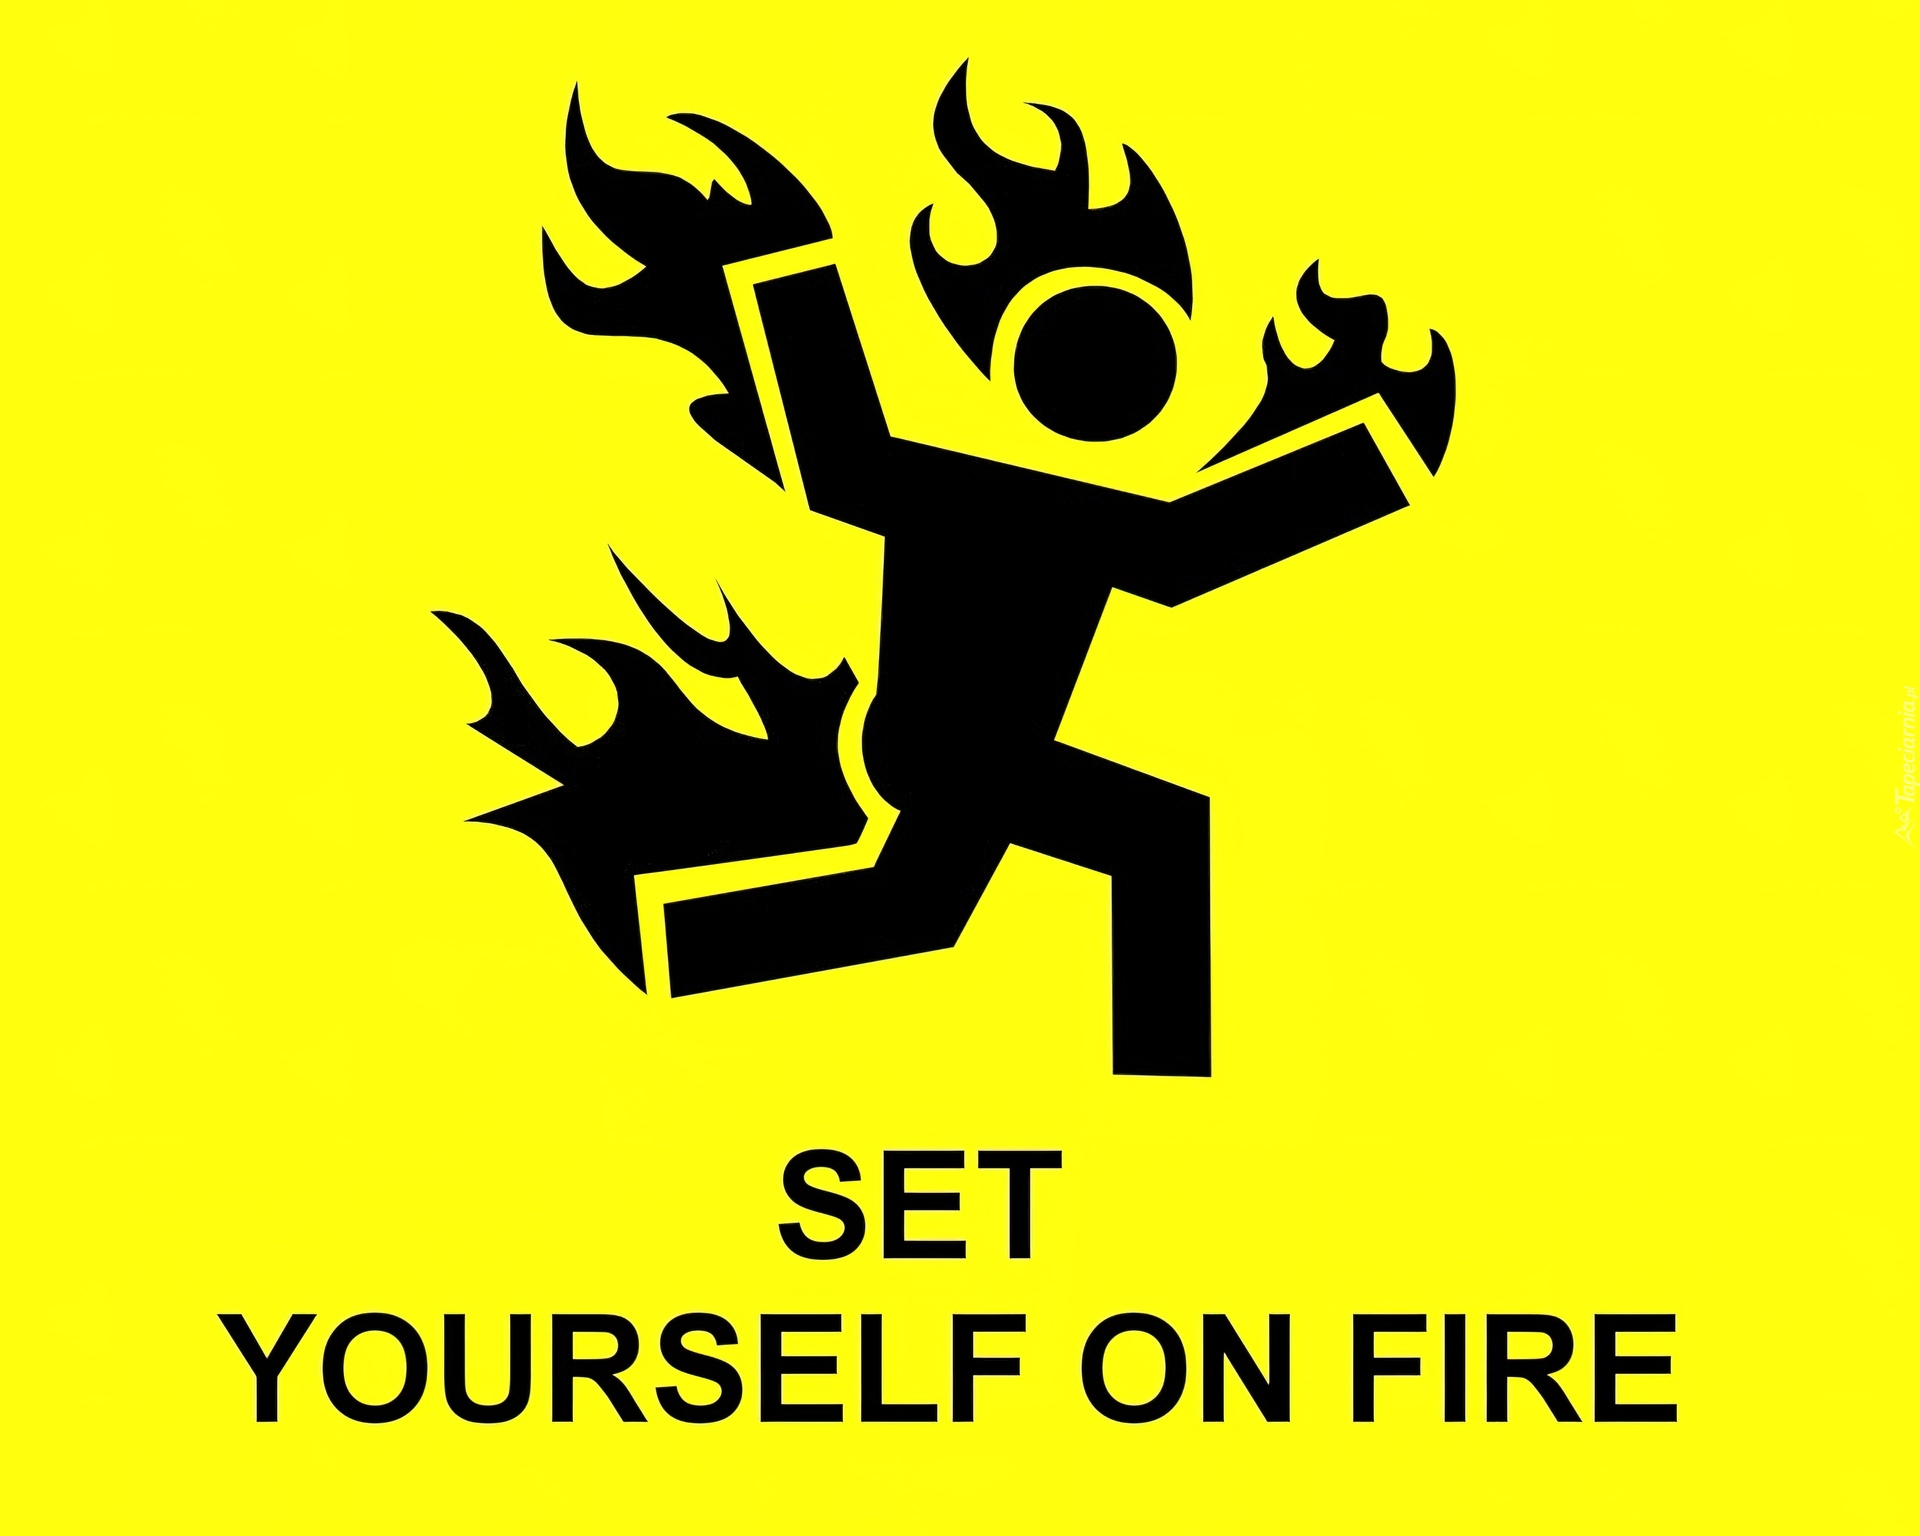 Set, Yourself, On, Fire